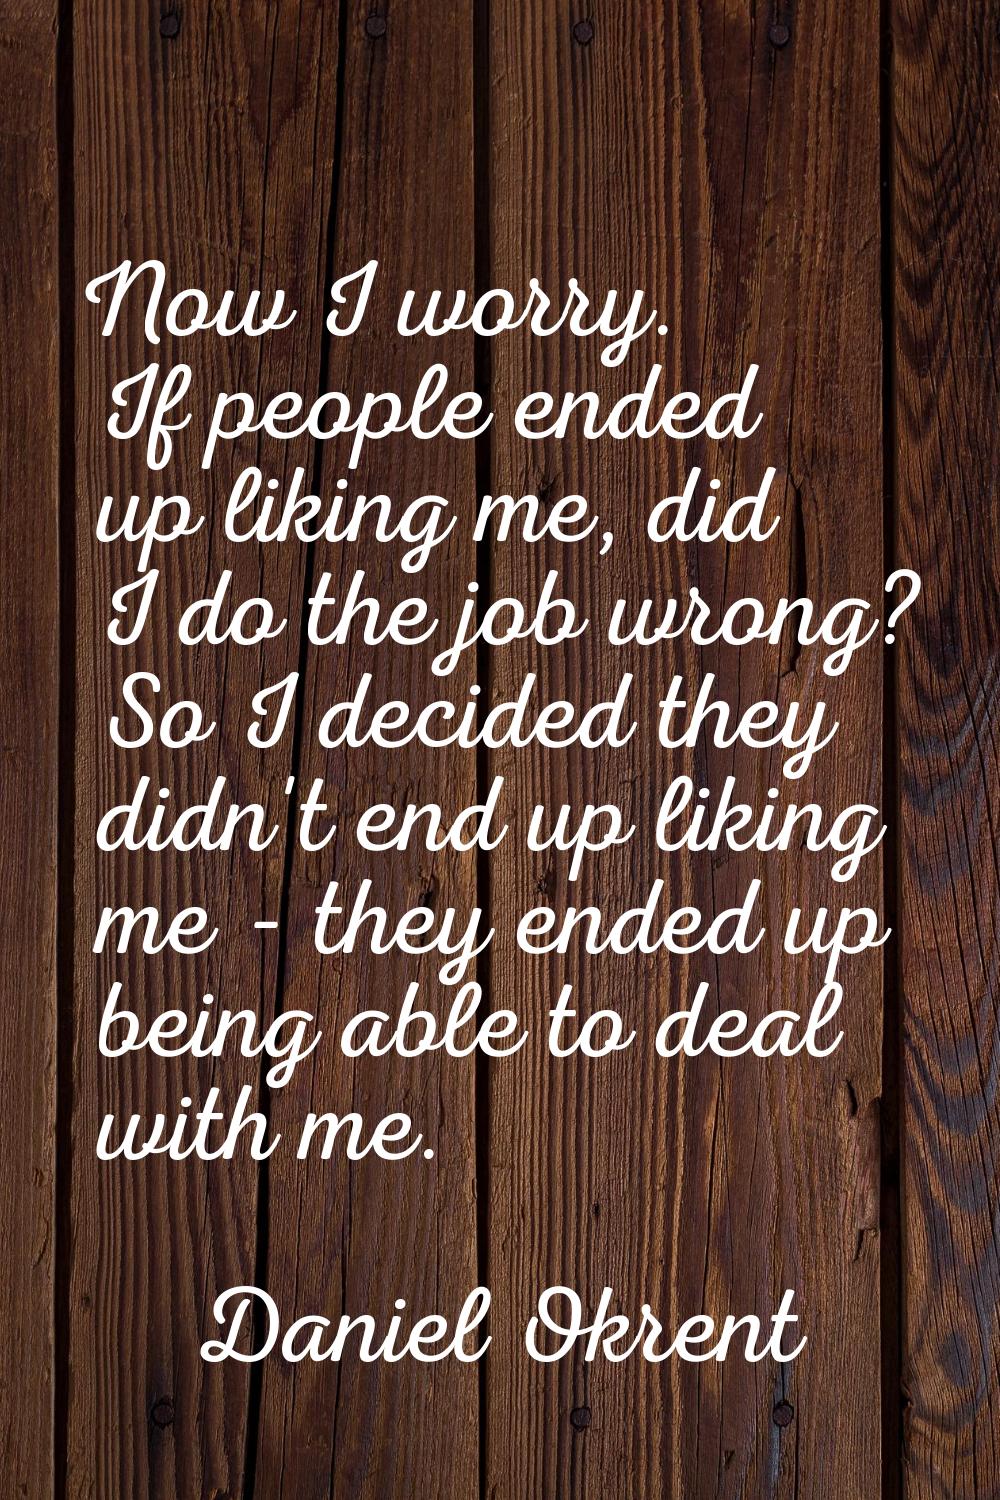 Now I worry. If people ended up liking me, did I do the job wrong? So I decided they didn't end up 